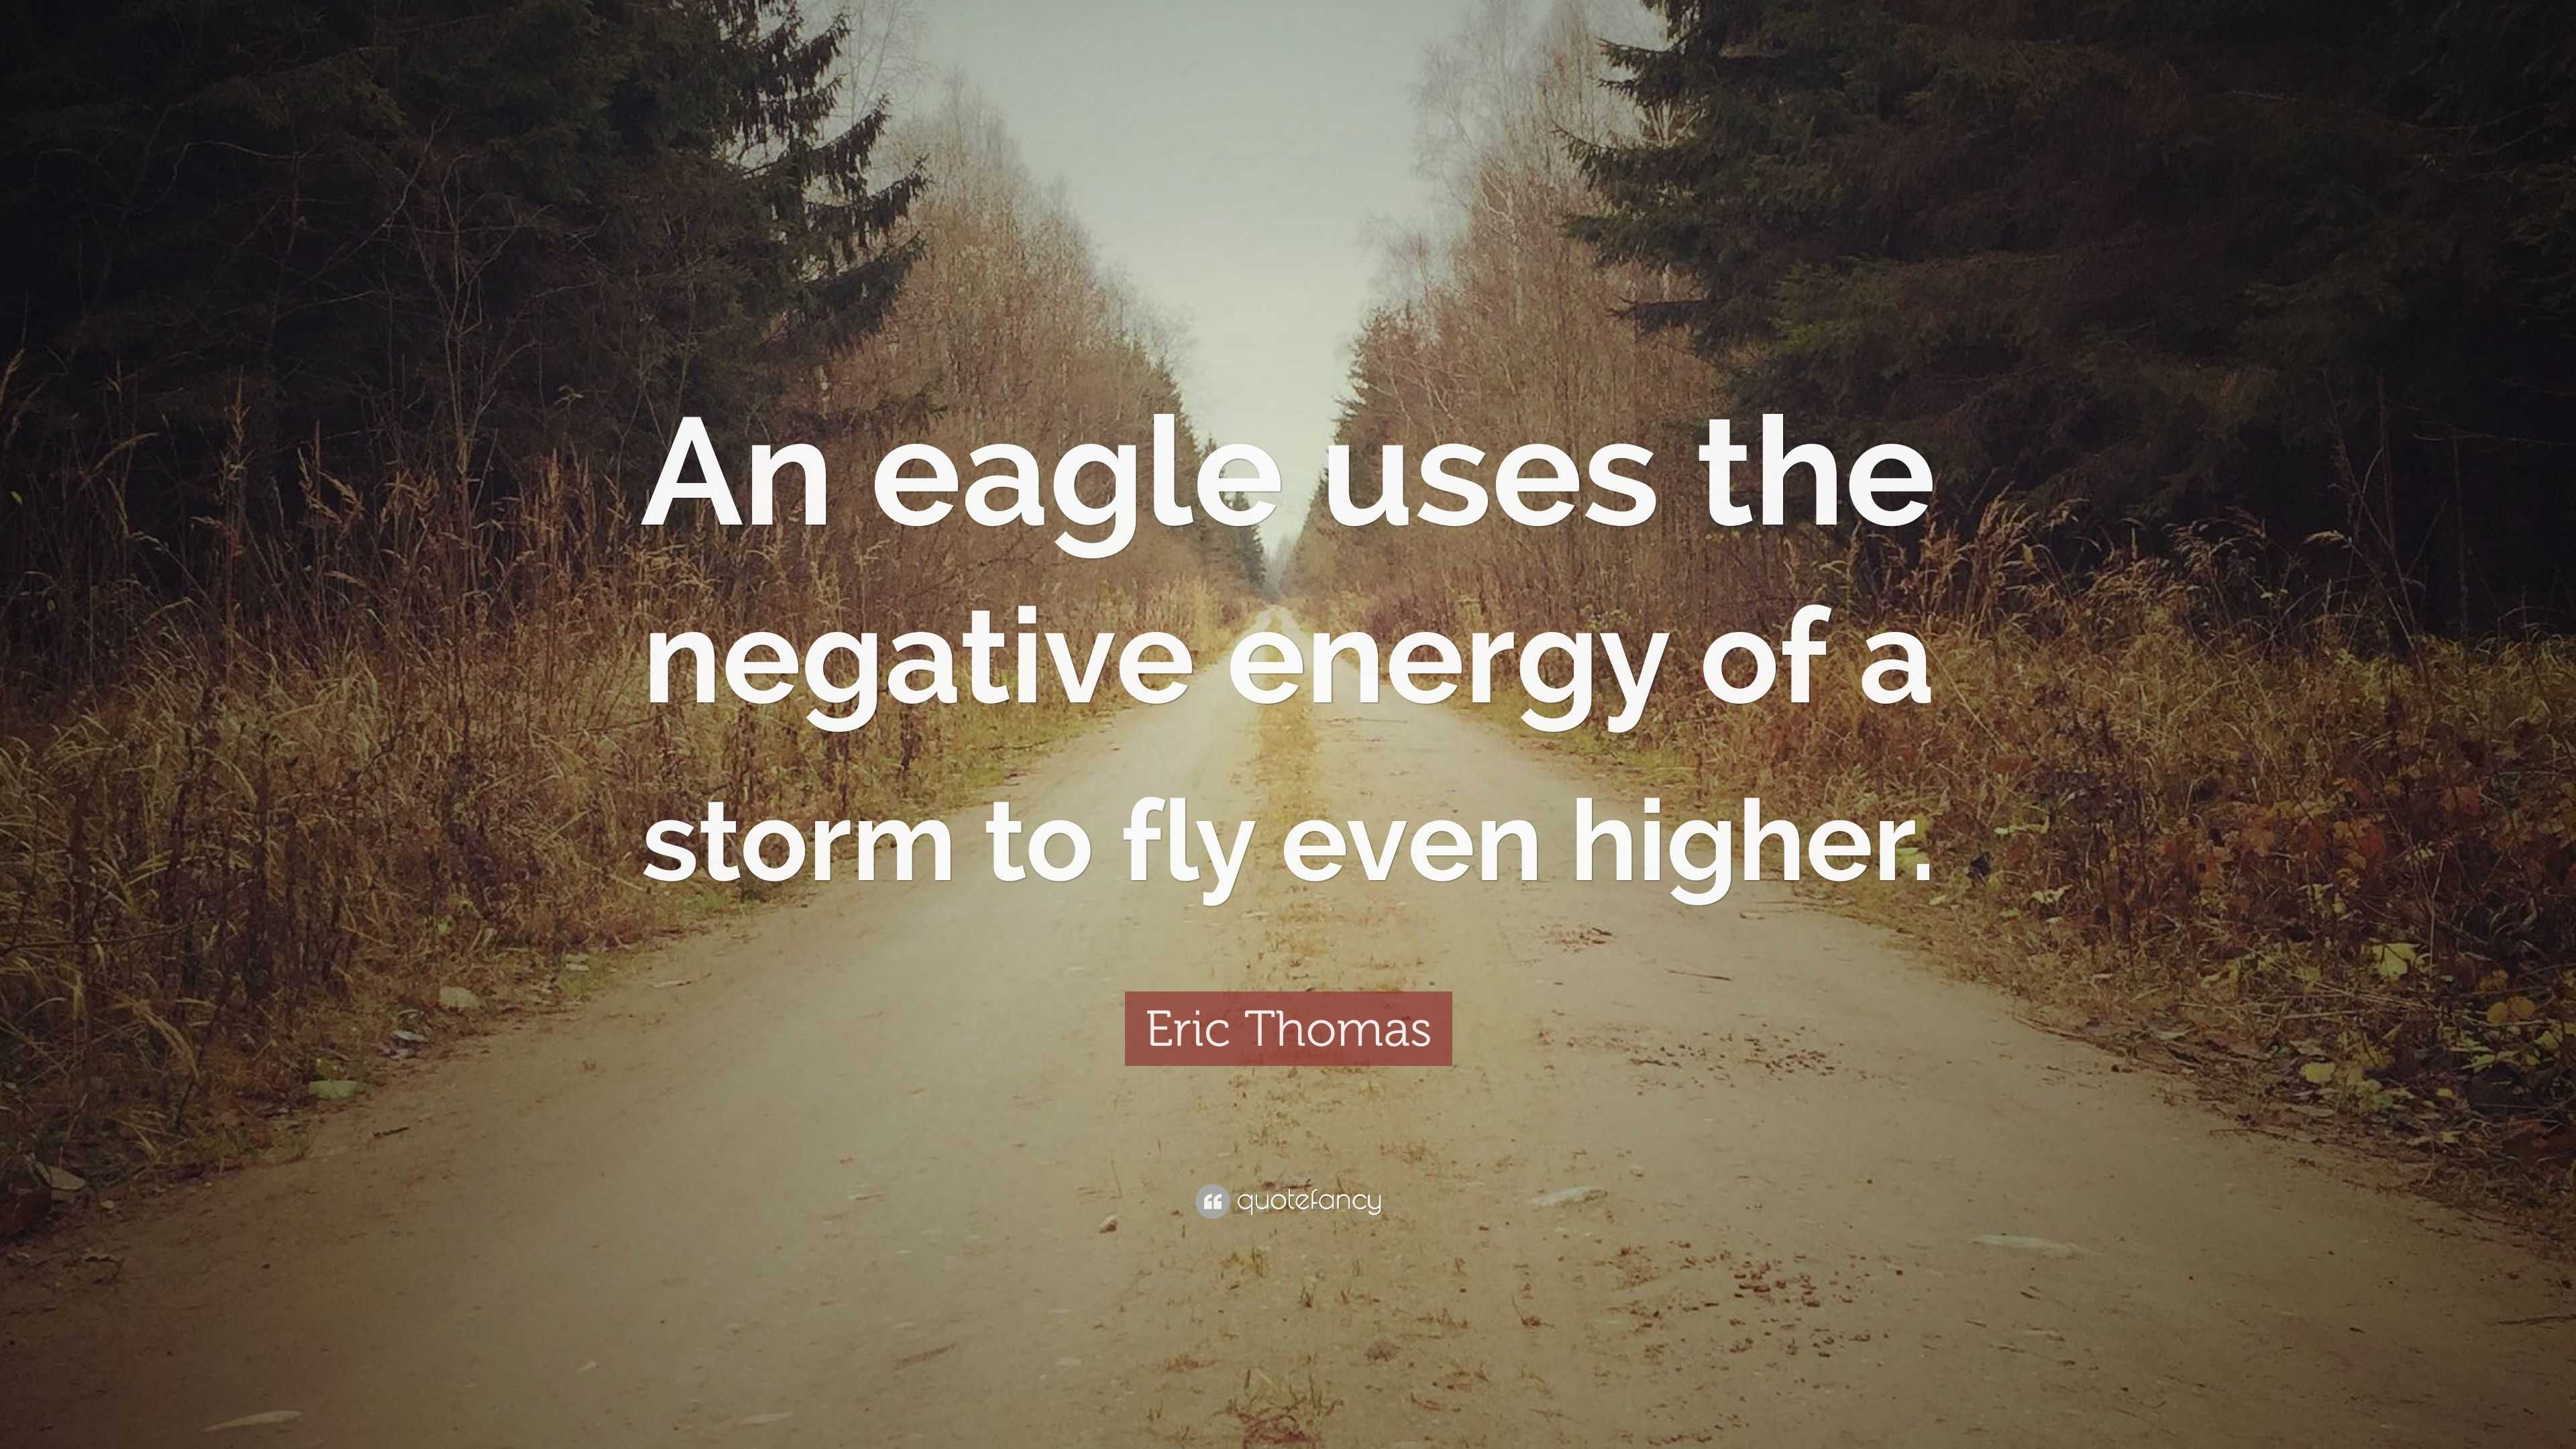 Eric Thomas Quote: "An eagle uses the negative energy of a storm to fly even higher." (12 ...